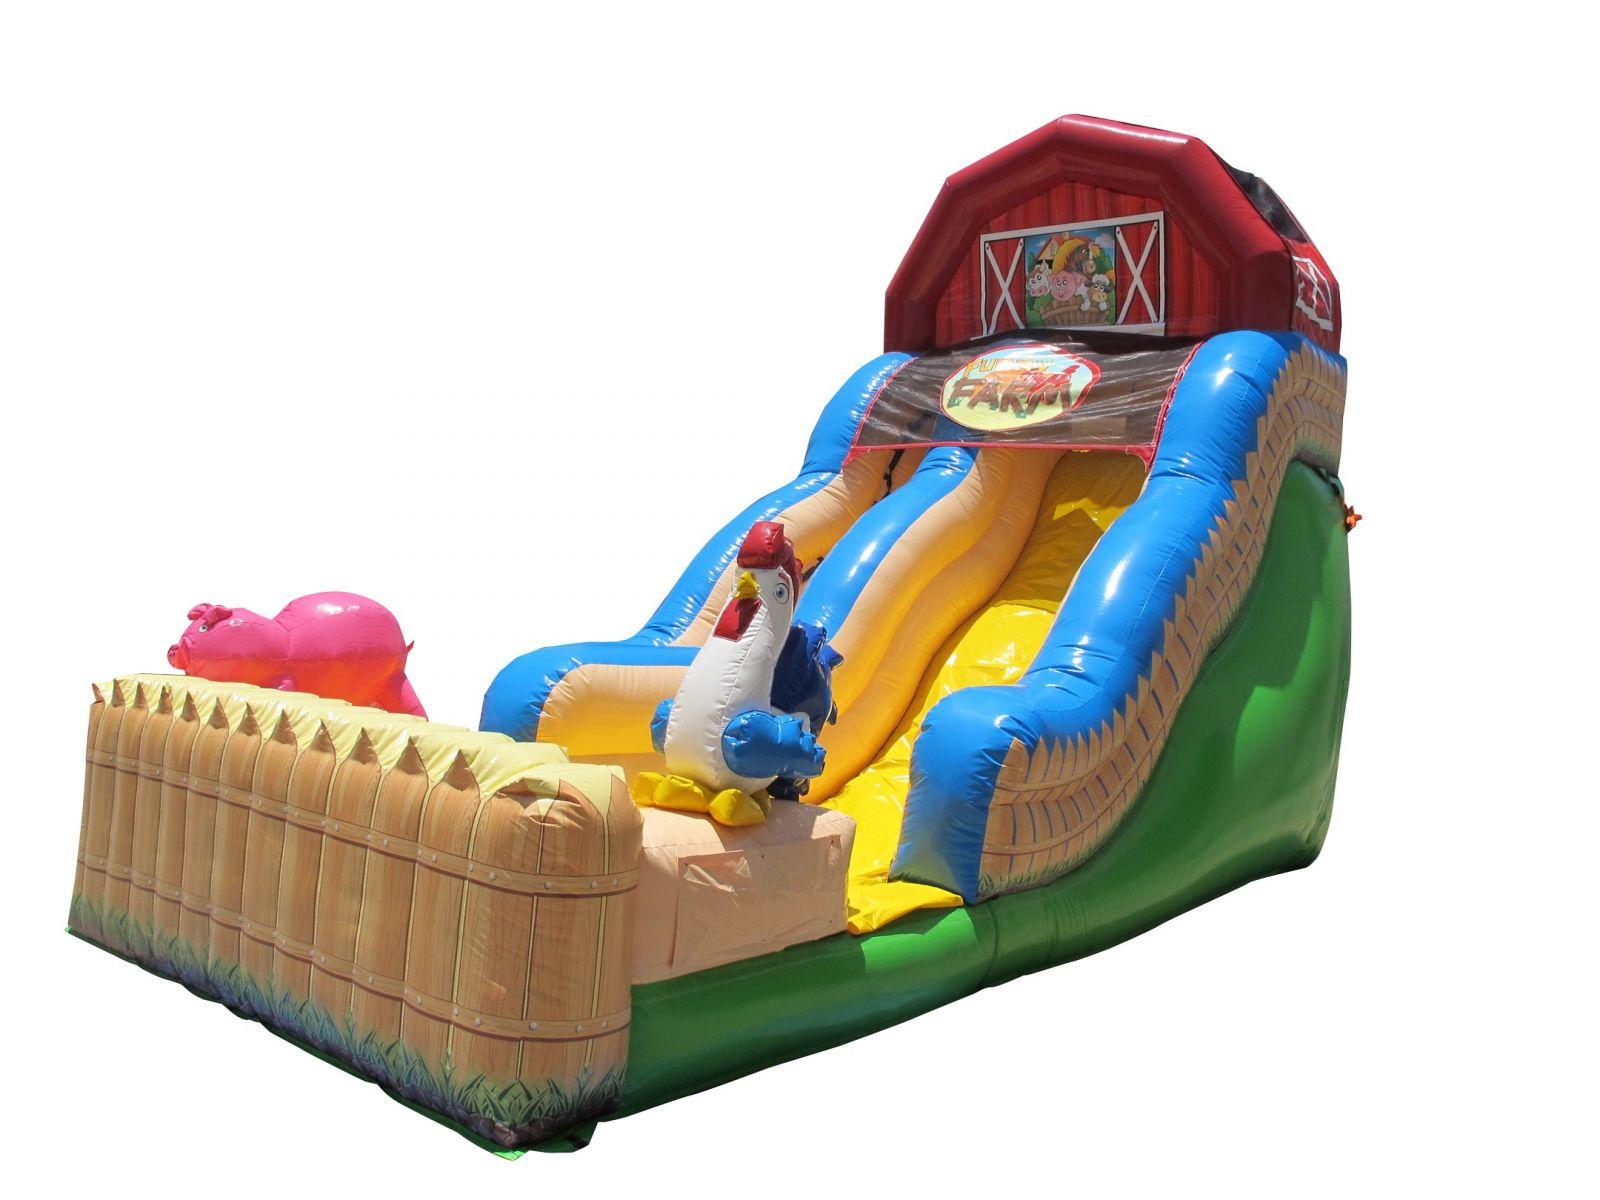 Funny Farm Barnyard Themed Inflatable Waterslide Rental Chicago IL